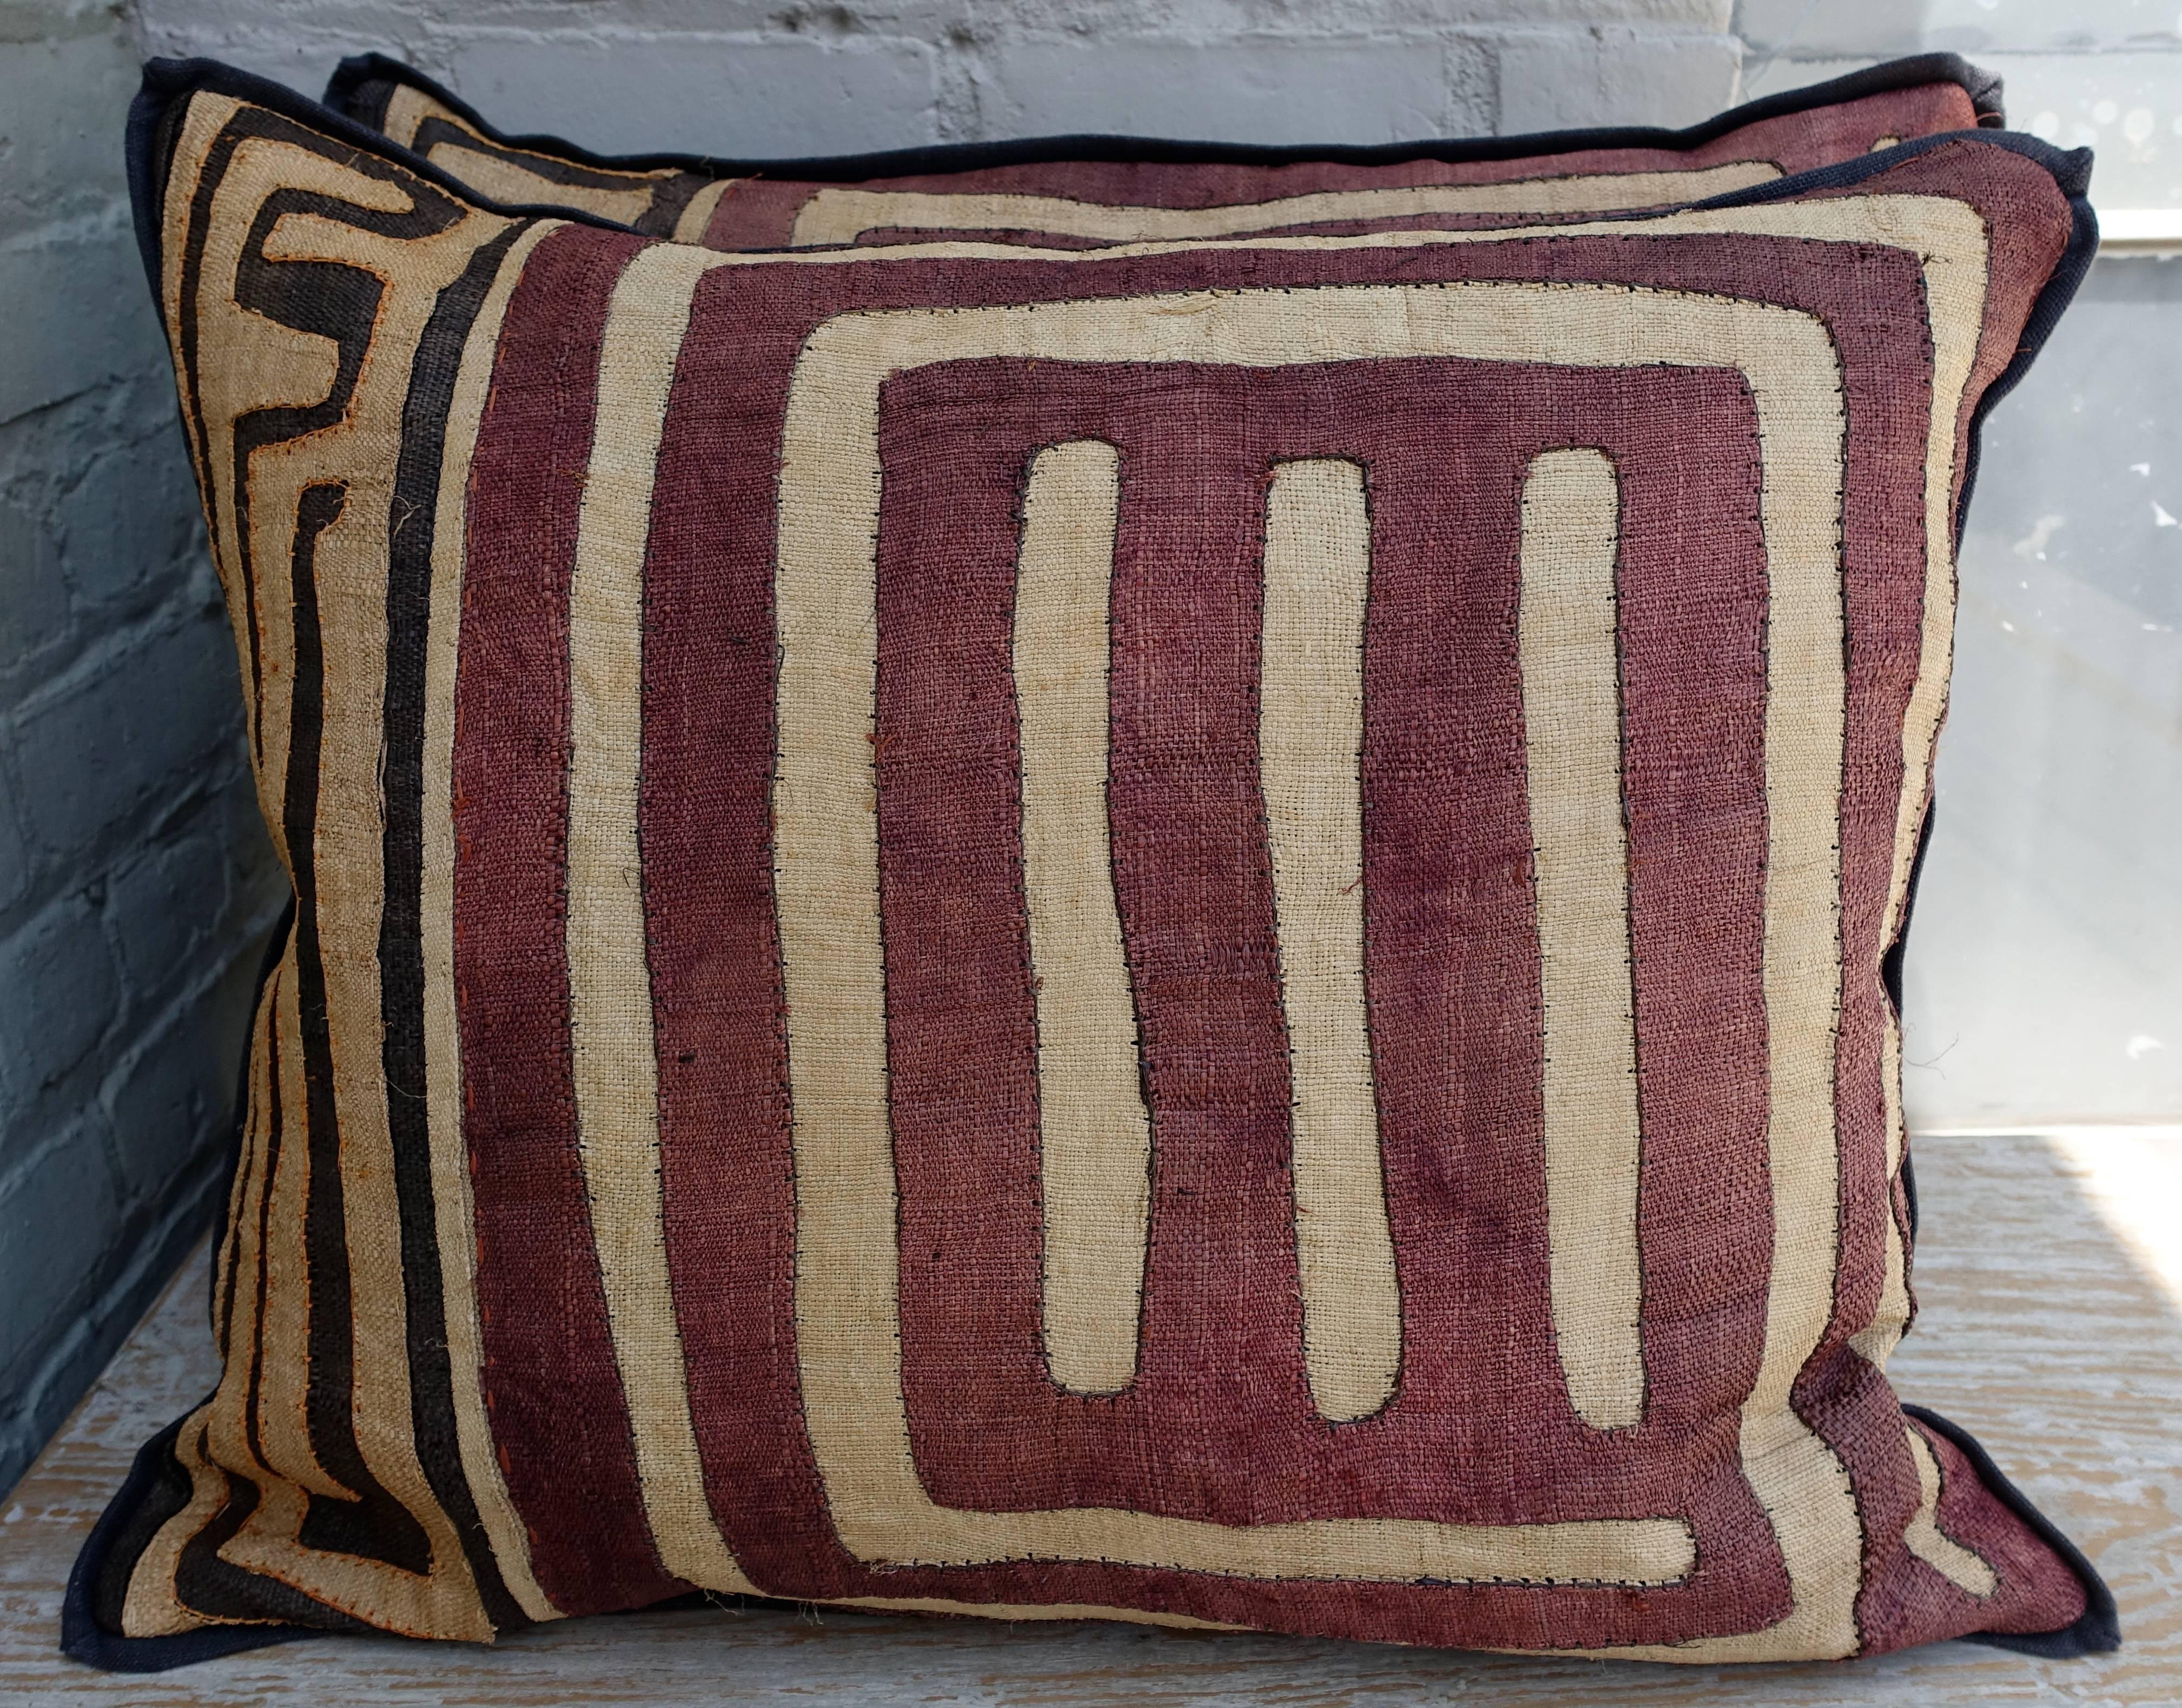 A pair of large rectangular custom designed African Kuba cloth pillows. Aubergine and black raffia fronts. Black linen backs with self welt detail. Down inserts, sewn closed.